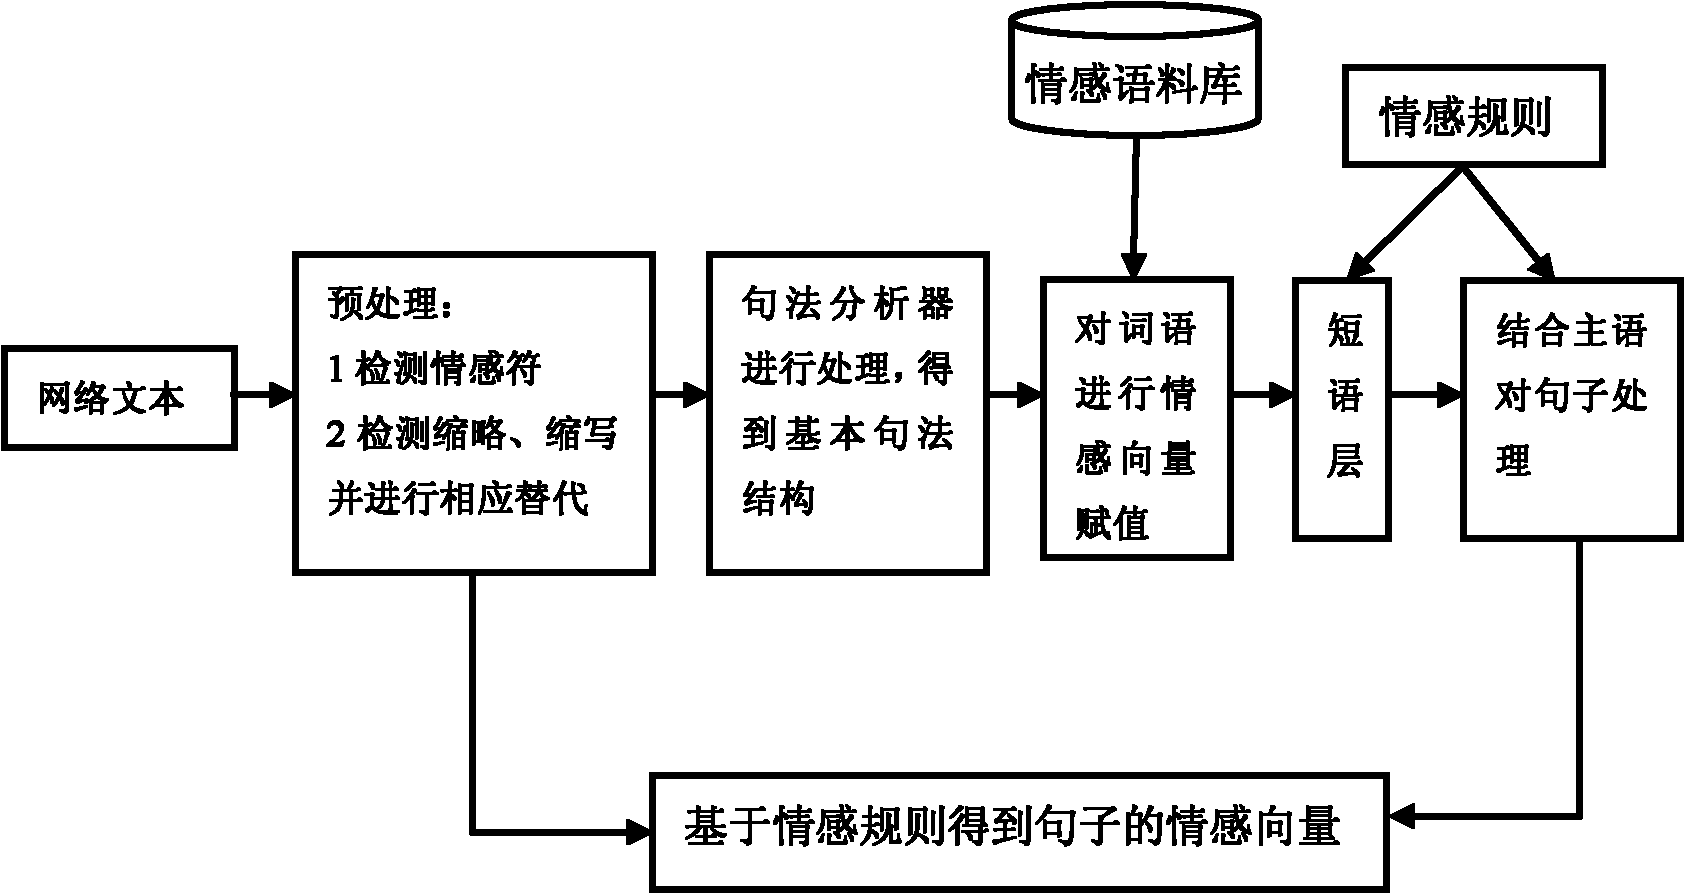 Semantic-based Chinese network text emotion extracting method